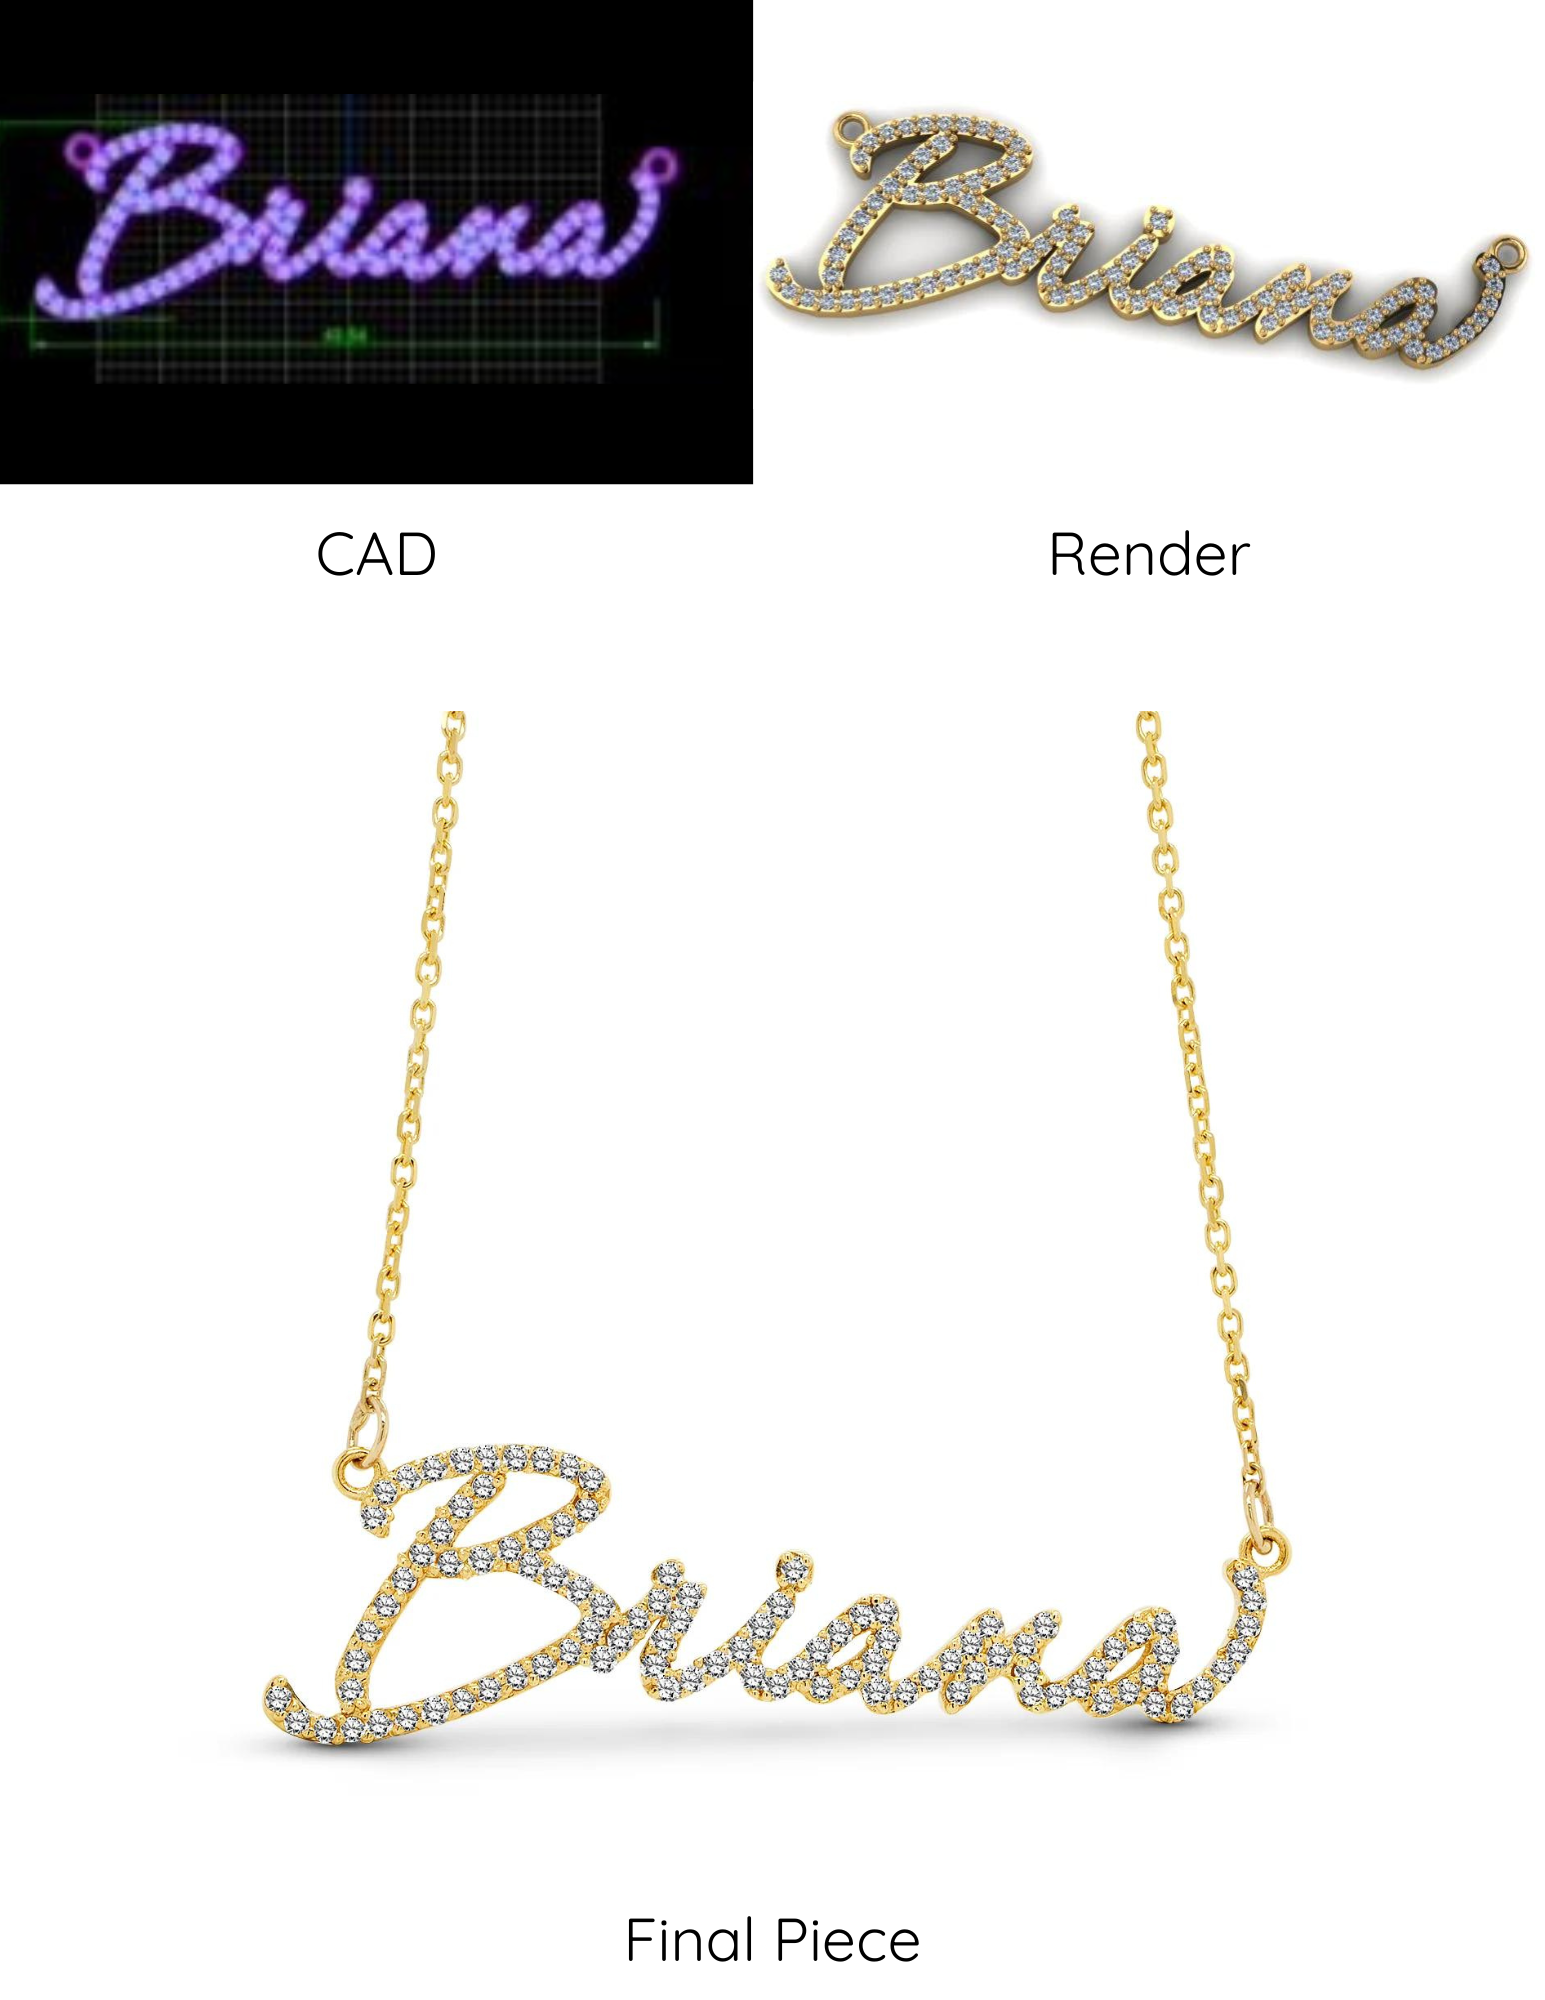 Custom gold name pendant on CAD model, render and final piece